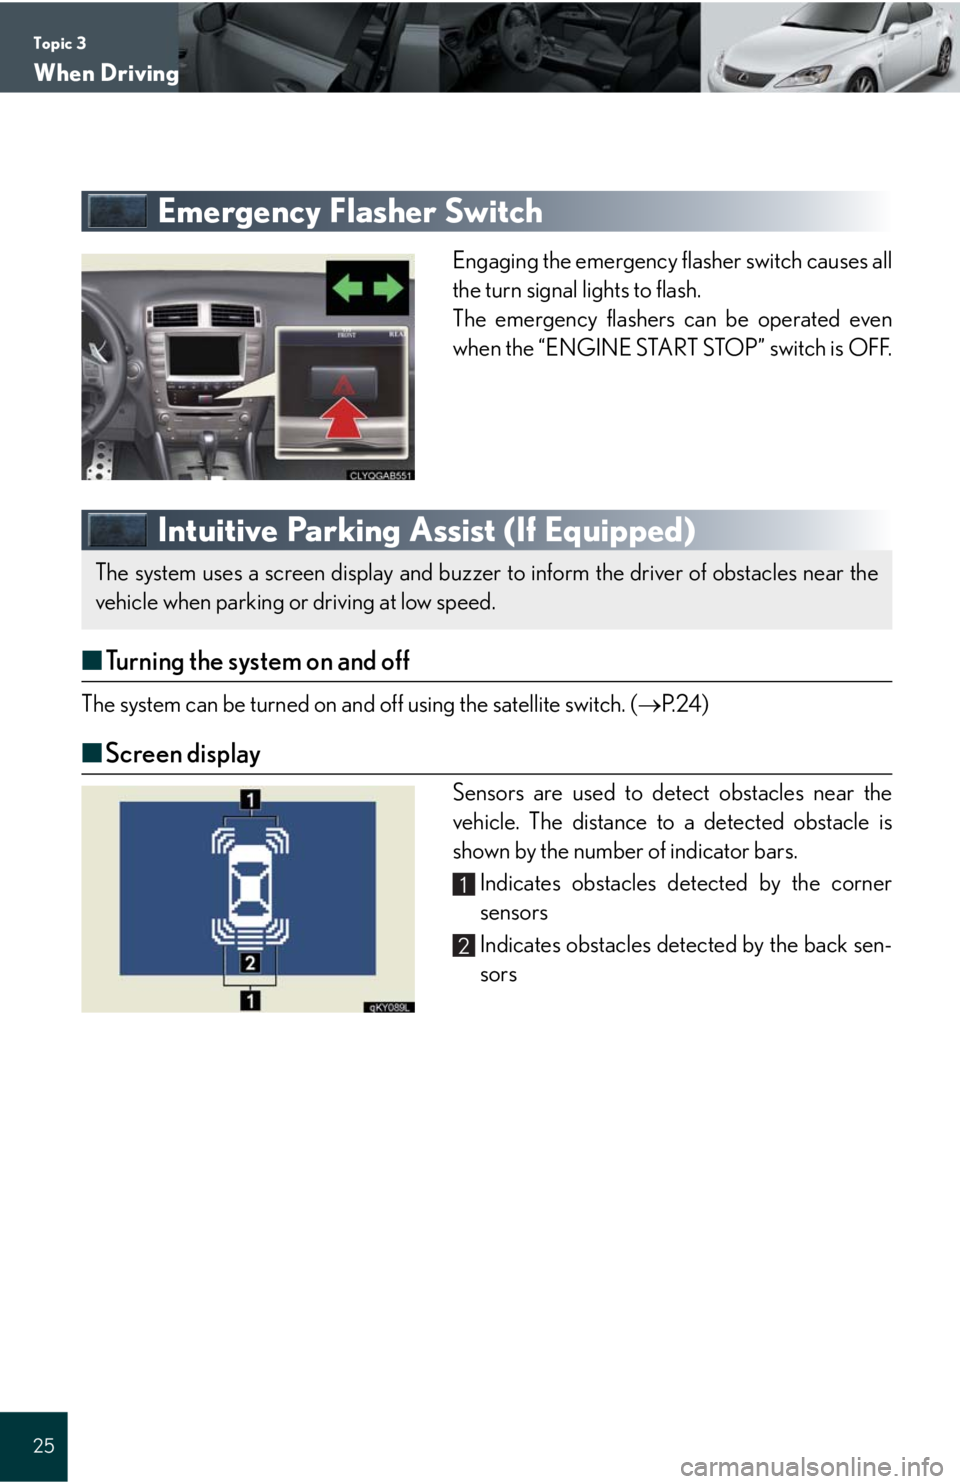 Lexus IS F 2008  Audio/video System / LEXUS 2008 IS F QUICK GUIDE OWNERS MANUAL (OM53613U) Topic 3
When Driving
25
Emergency Flasher Switch
Engaging the emergency flasher switch causes all
the turn signal lights to flash.
The emergency flashers can be operated even
when the “ENGINE START 